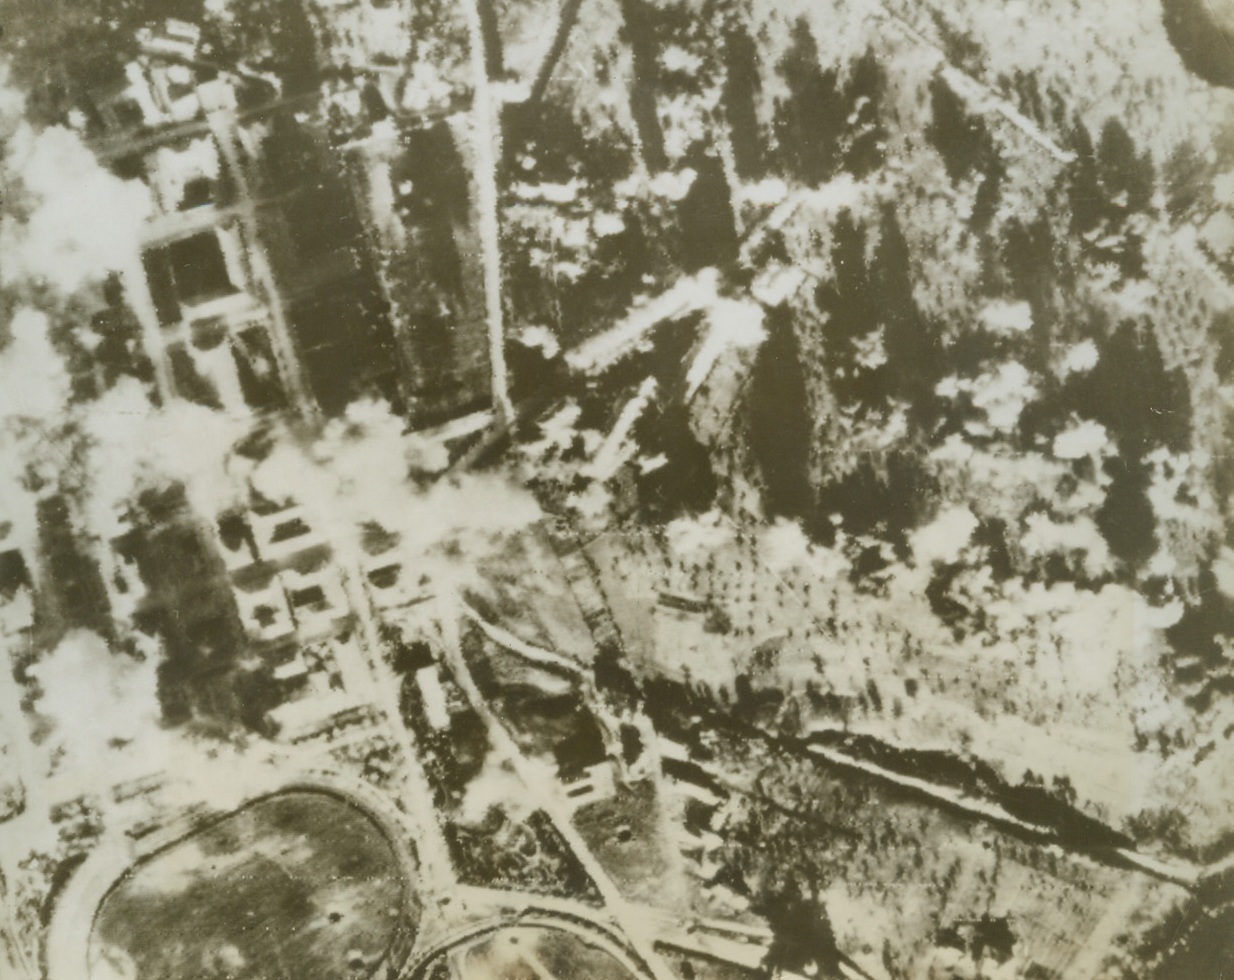 “Excellent Bombing”, 12/3/1943. LANCIANO, ITALY – Allied bombardiers won another round of praise after their recent bombing of roads and enemy-defended positions on the Sangro River front. The marksmanship behind the bomb bursts shown here, at Lanciano, won a report of “excellent bombing” from the Eighth Army. Photo radioed to New York from Algiers. Credit Line (ACME Radiophoto);